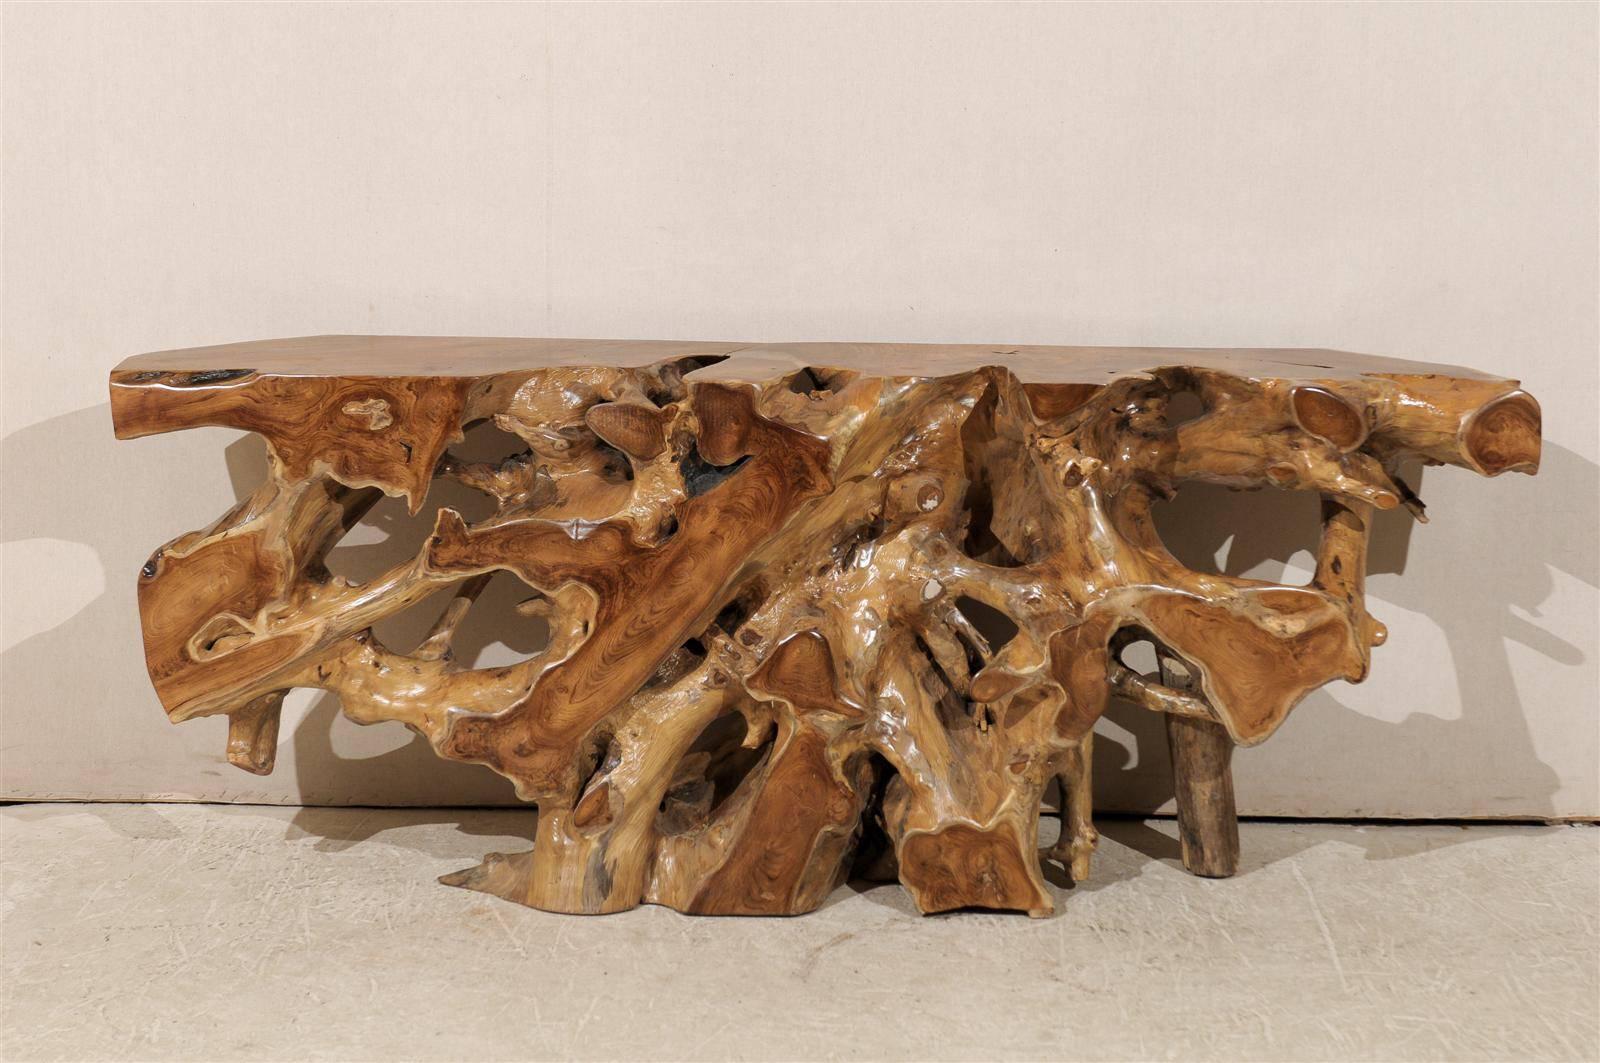 An Indonesian teak root wooden console table of interesting shape. 

With its flat back this table would be perfect placed against a wall. It is made of teak wood, which is a tropical hardwood, particularly valued for its durability and water